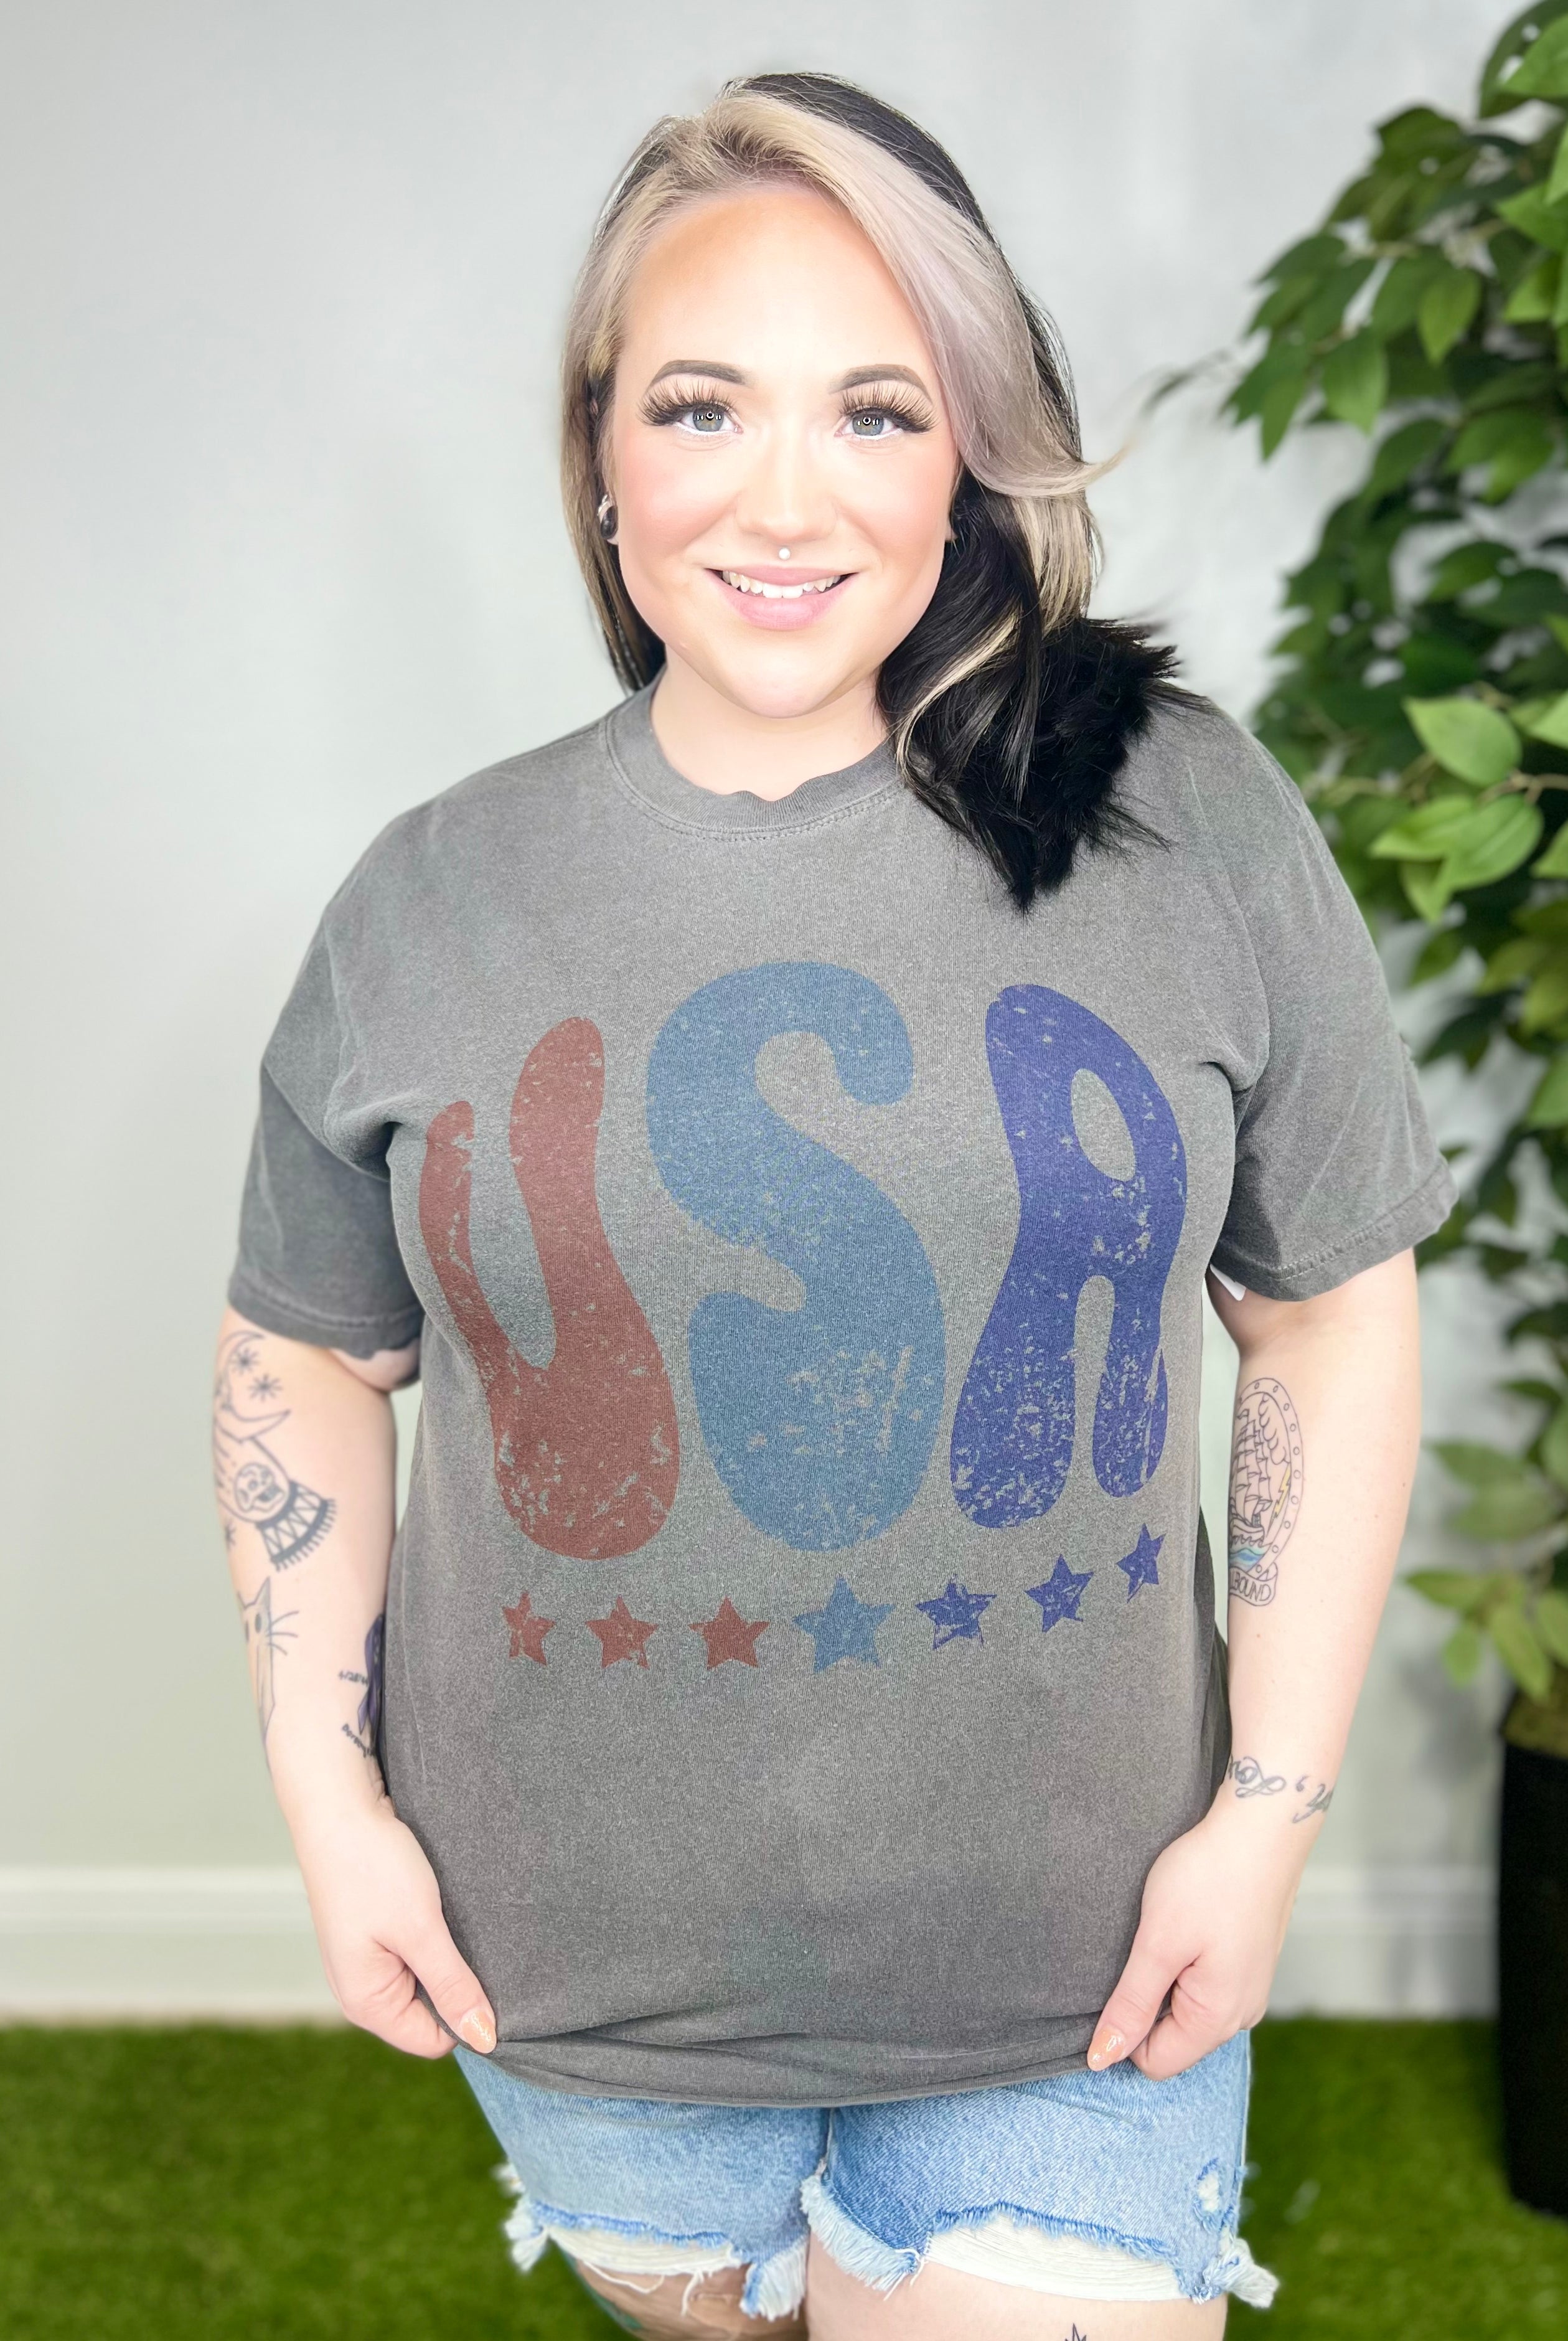 USA Graphic Tee-130 Graphic Tees-Heathered Boho-Heathered Boho Boutique, Women's Fashion and Accessories in Palmetto, FL